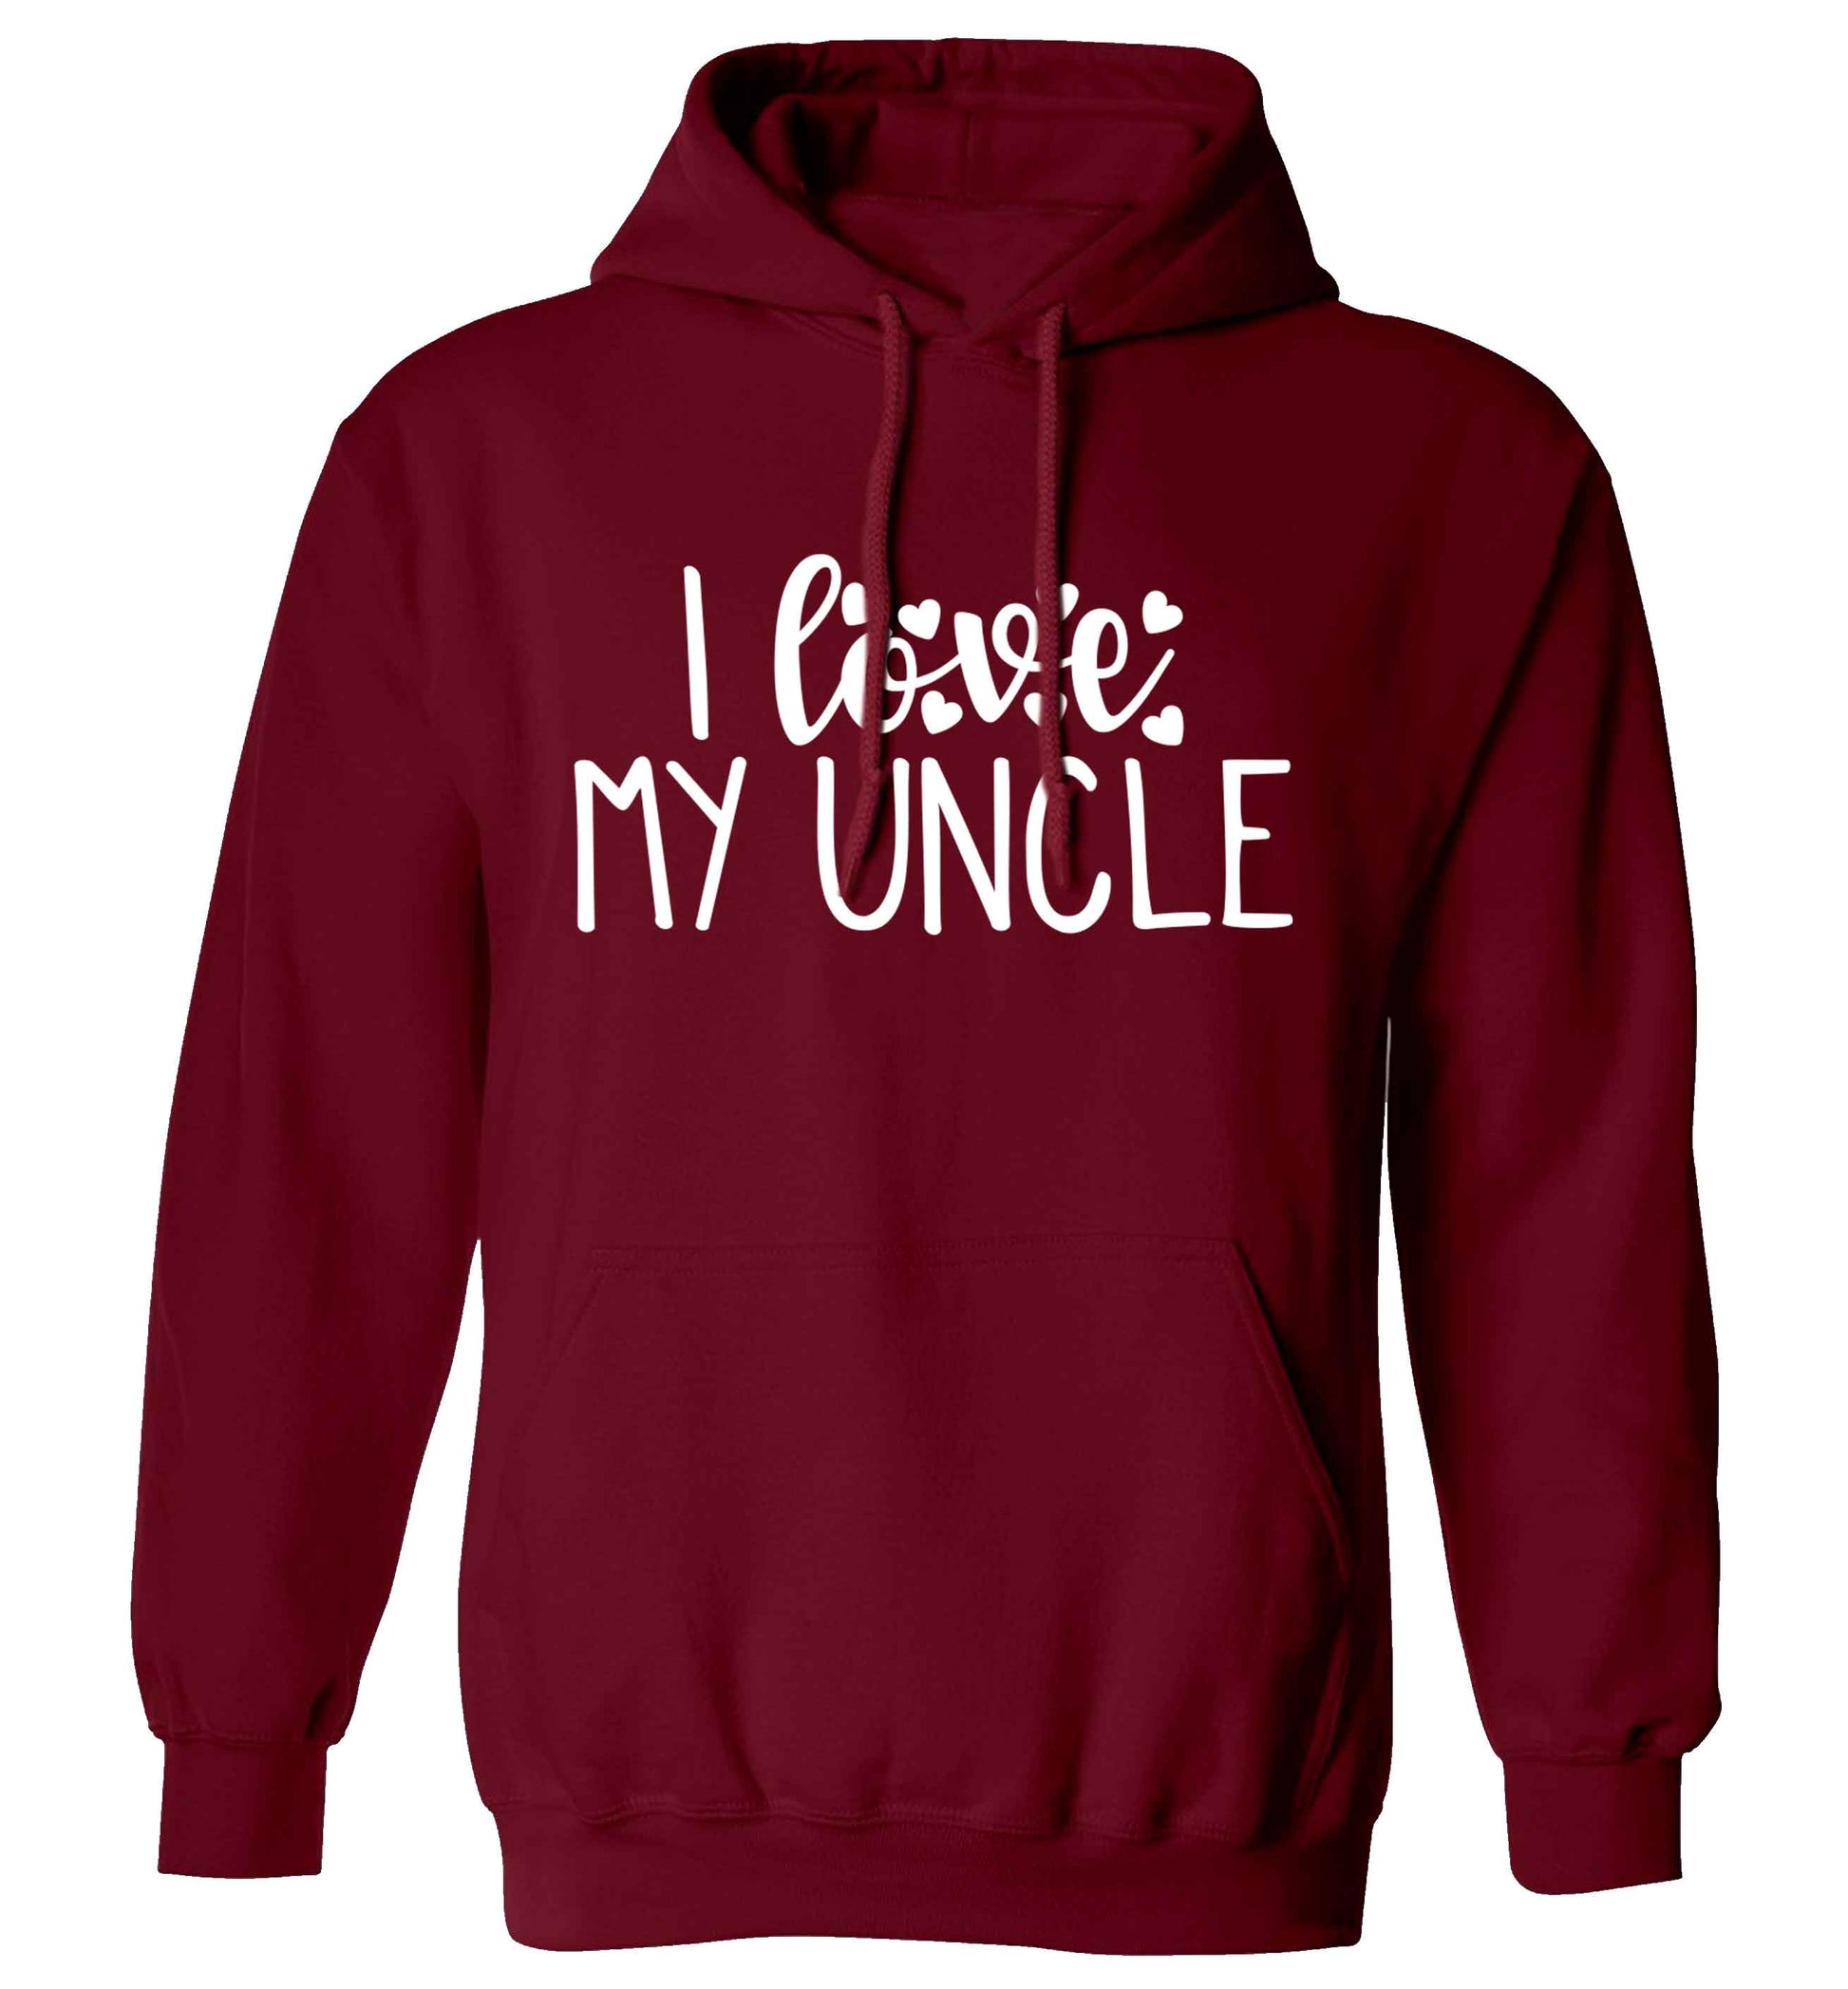 I love my uncle adults unisex maroon hoodie 2XL